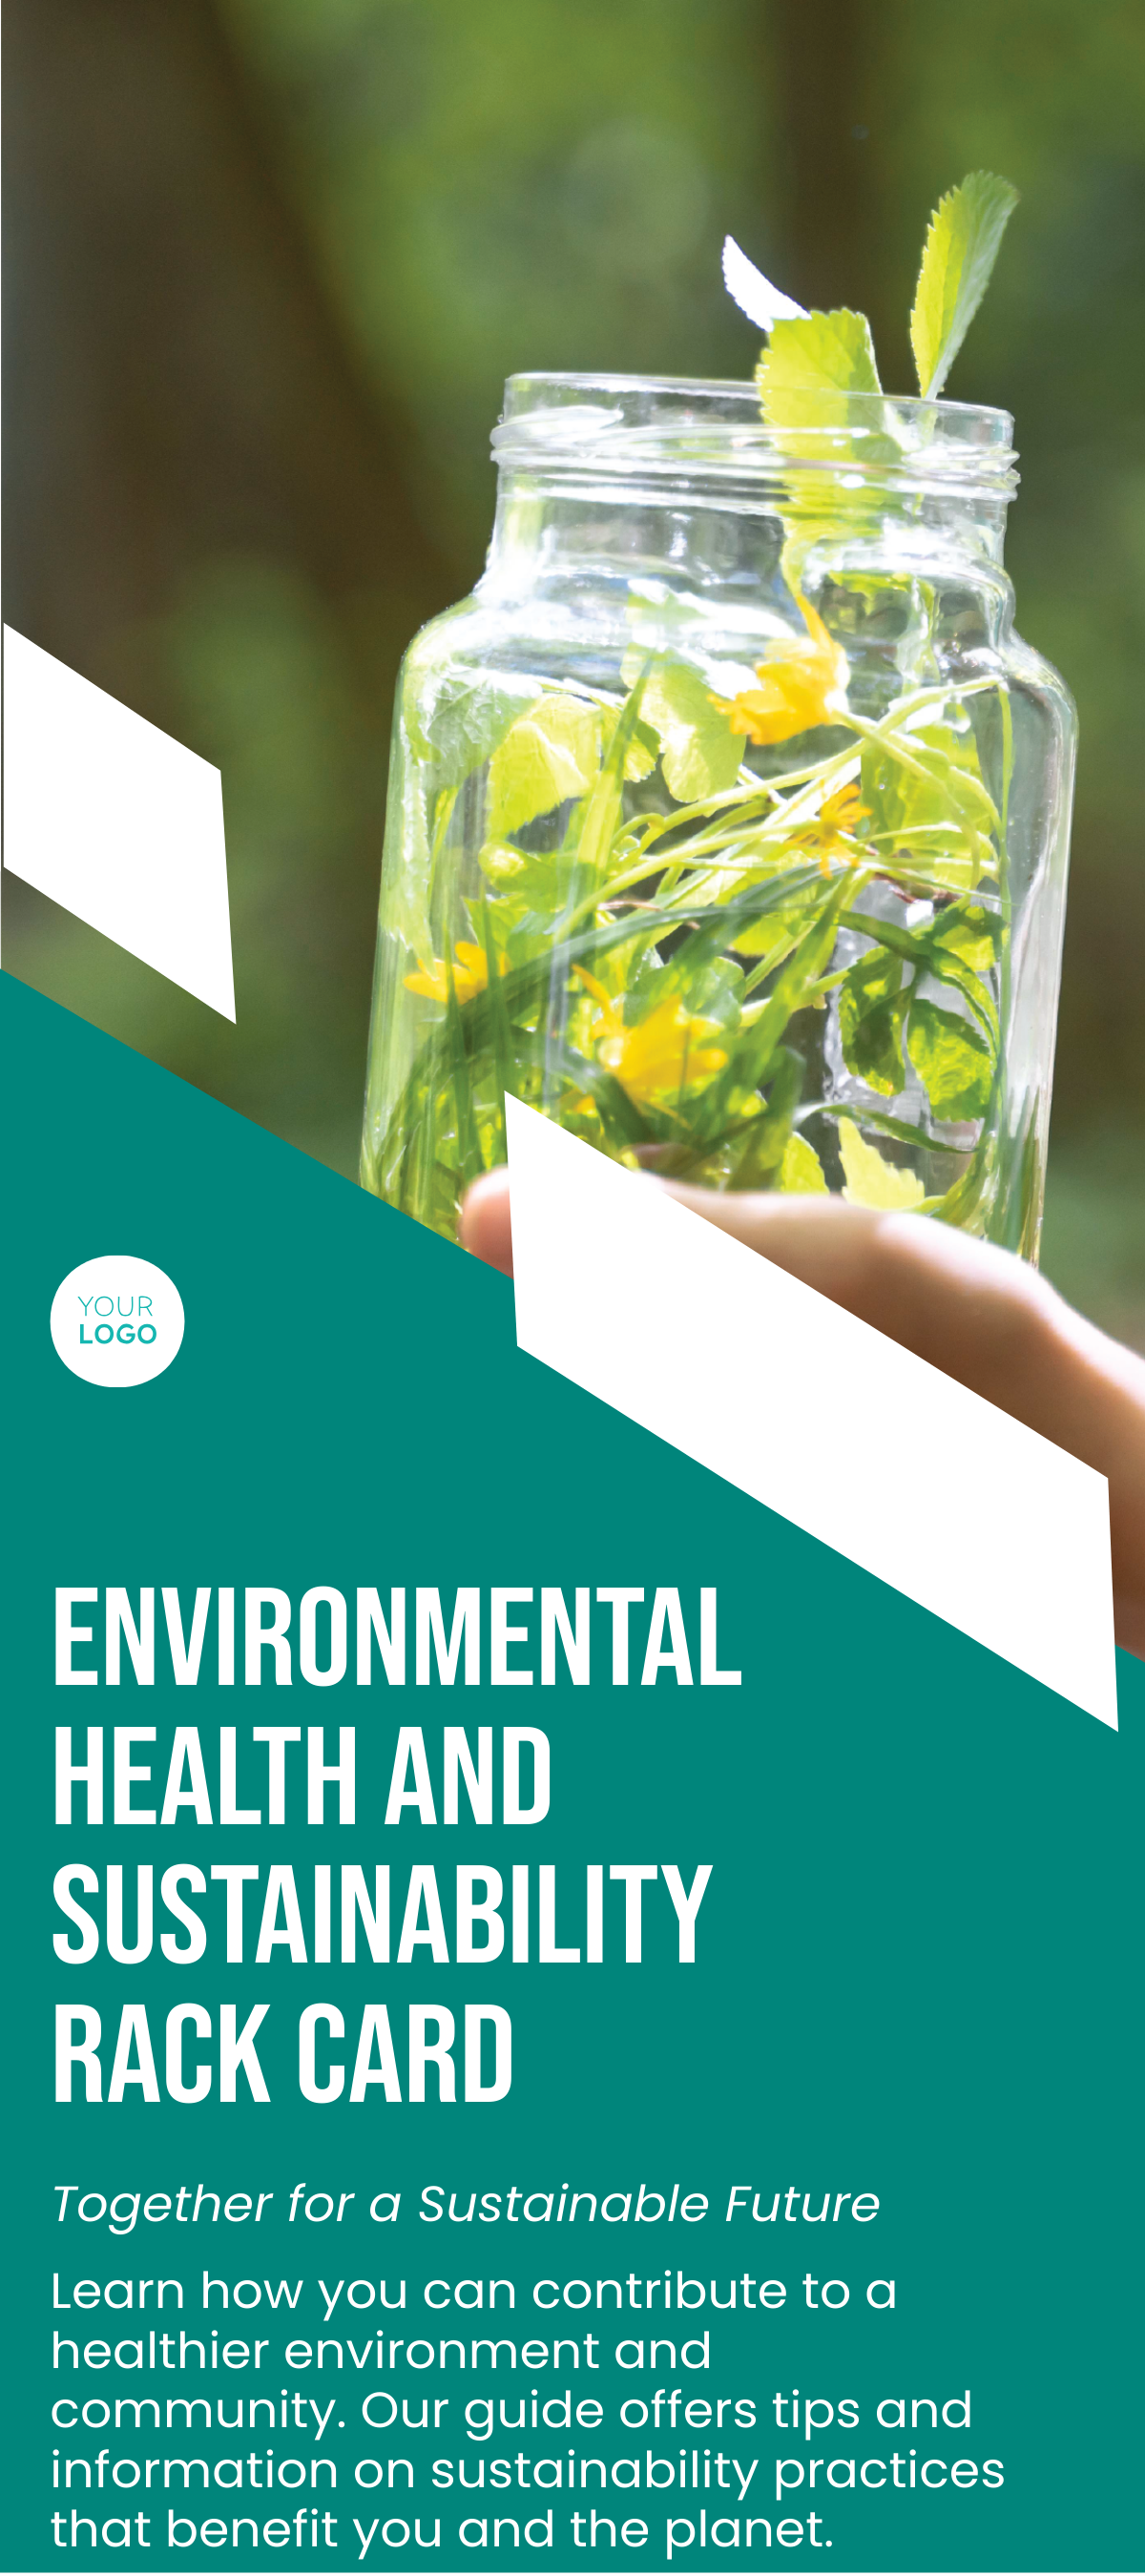 Environmental Health and Sustainability Rack Card Template